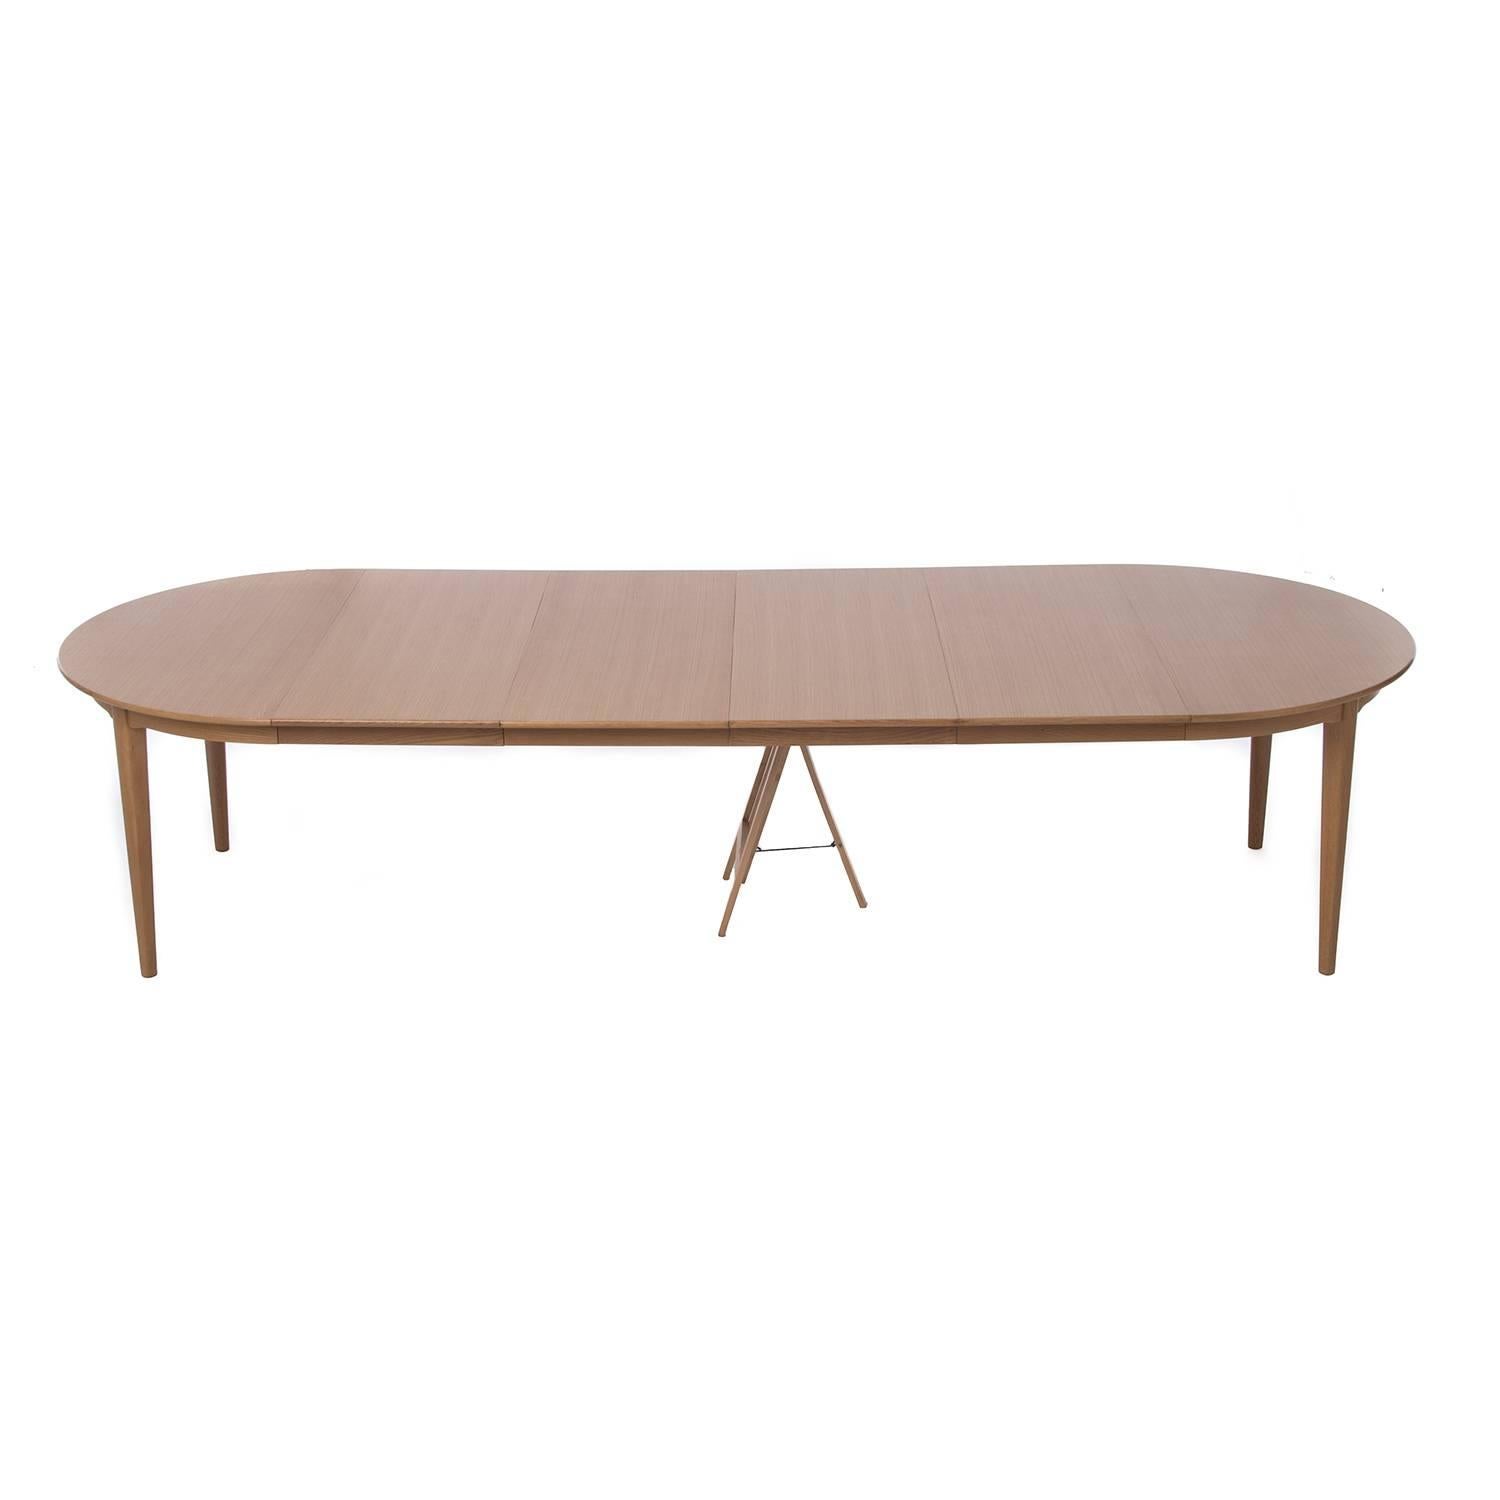 Oak Danish Modern Dining Table with Four Leaves